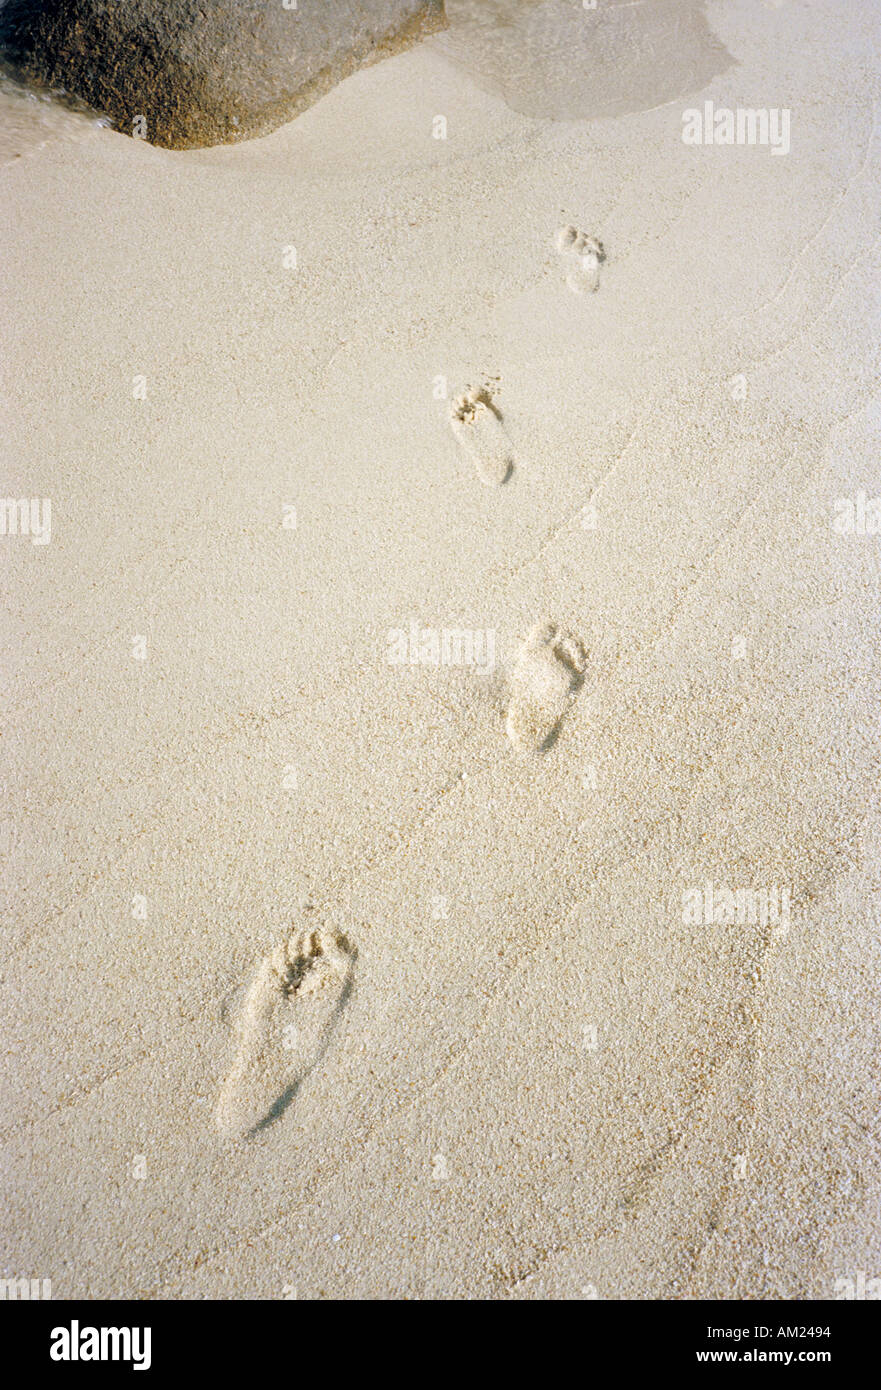 Footprints in coral sand Stock Photo